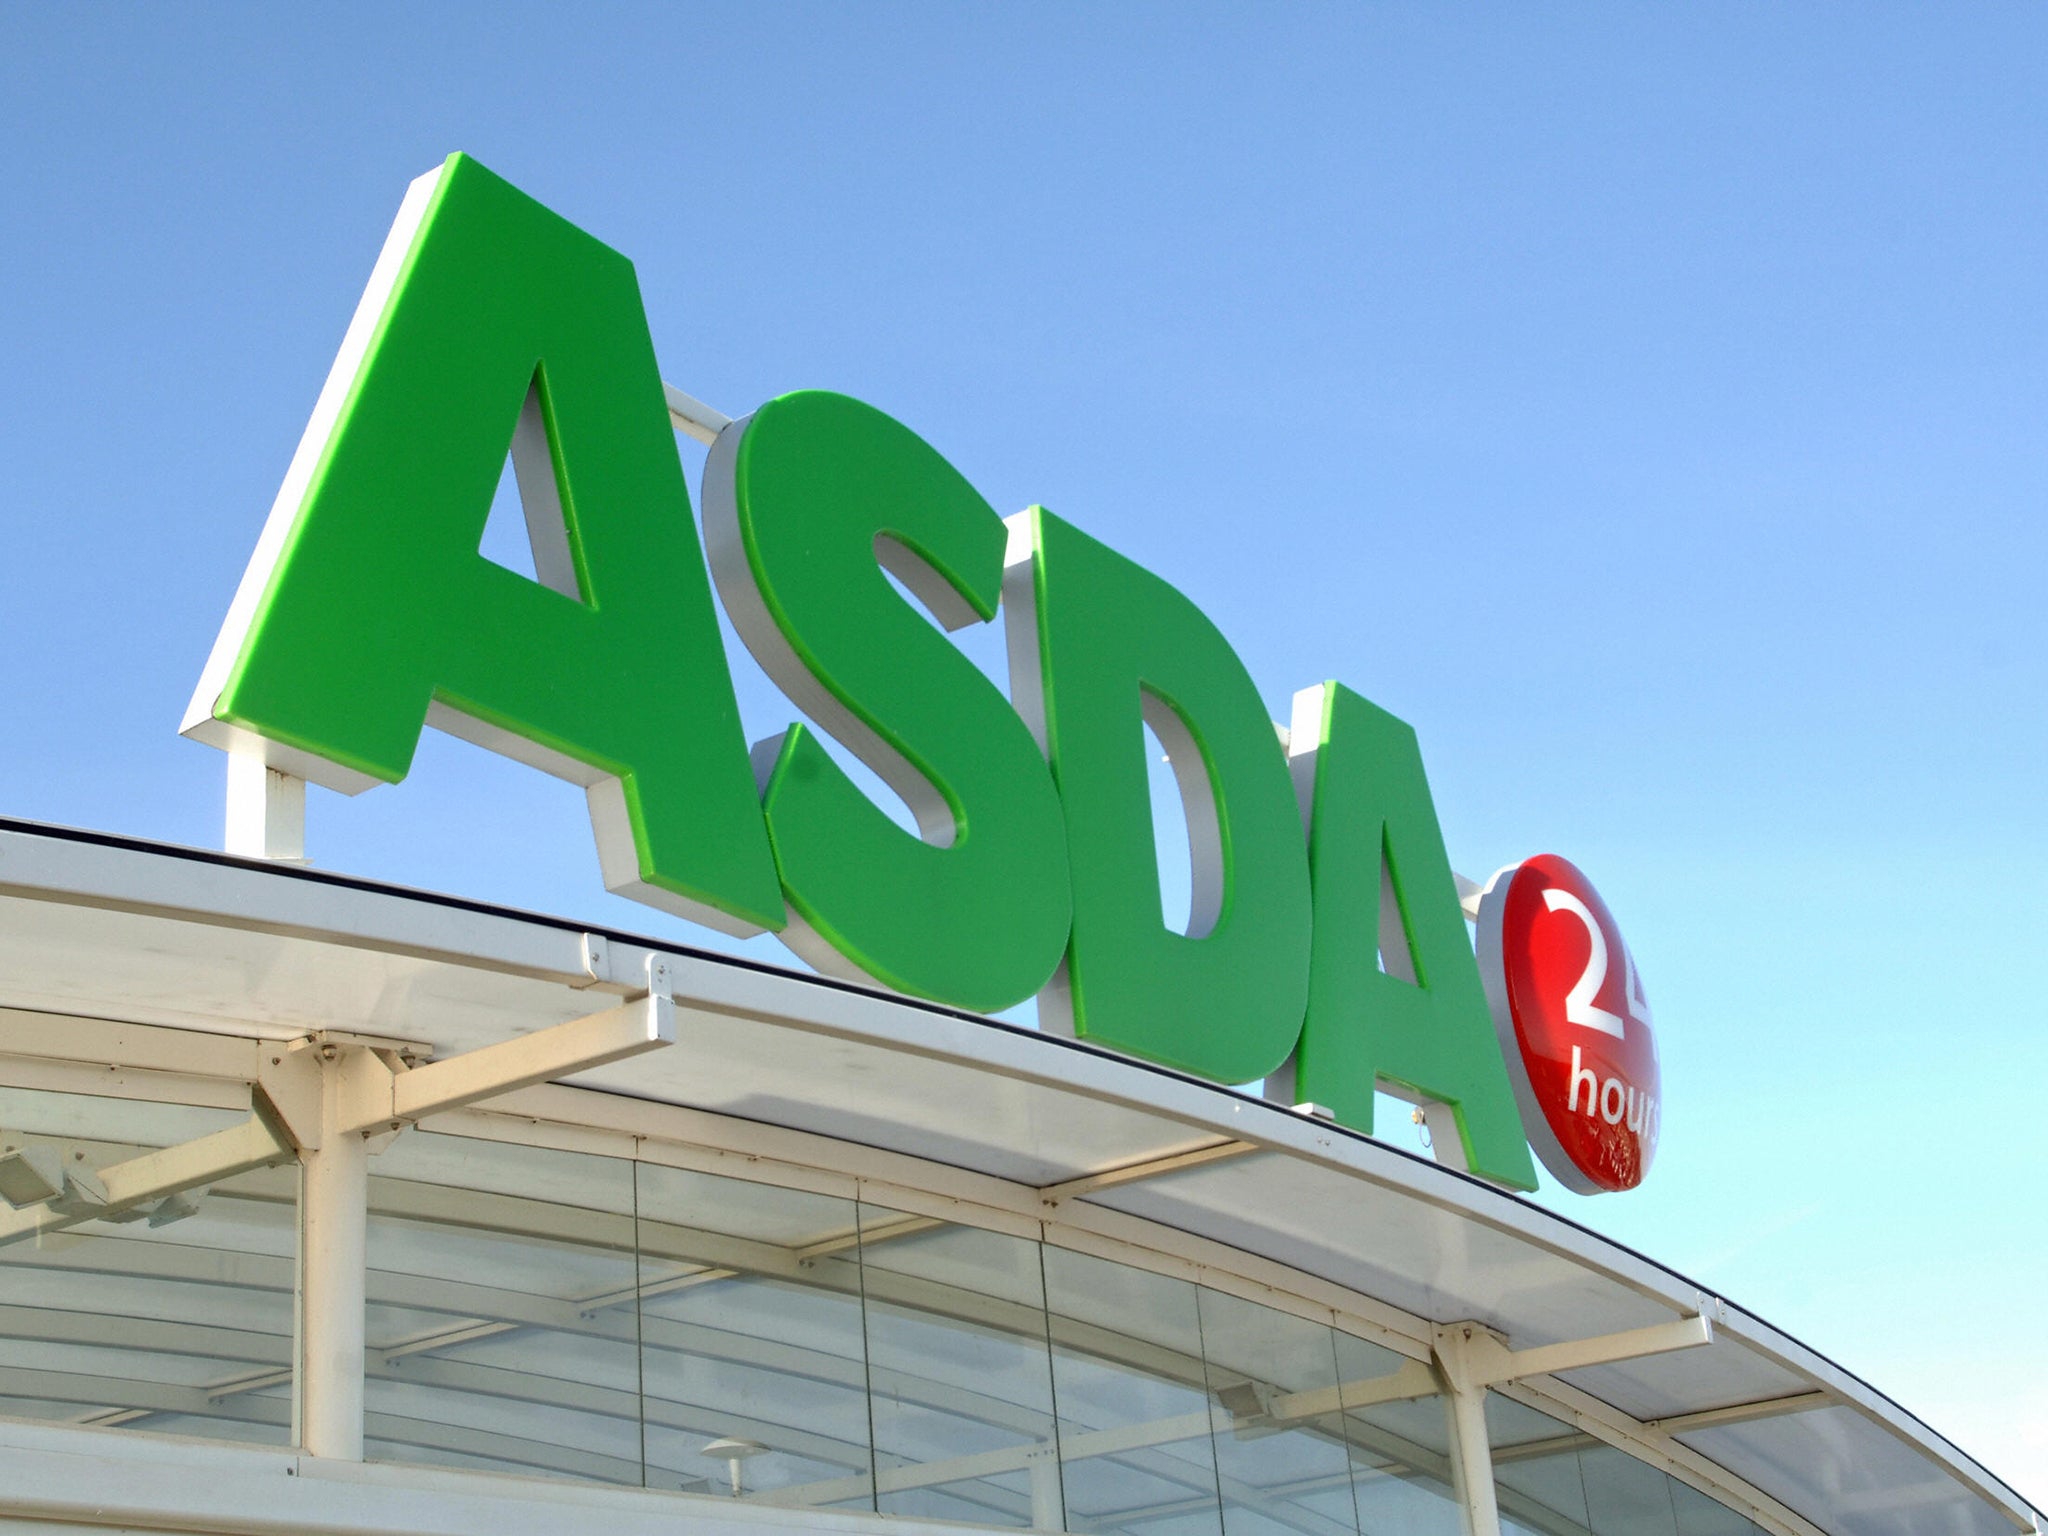 An Asda supermarket store logo is pictured in Halifax, in West Yorkshire, in northern England, 23 January 2007.